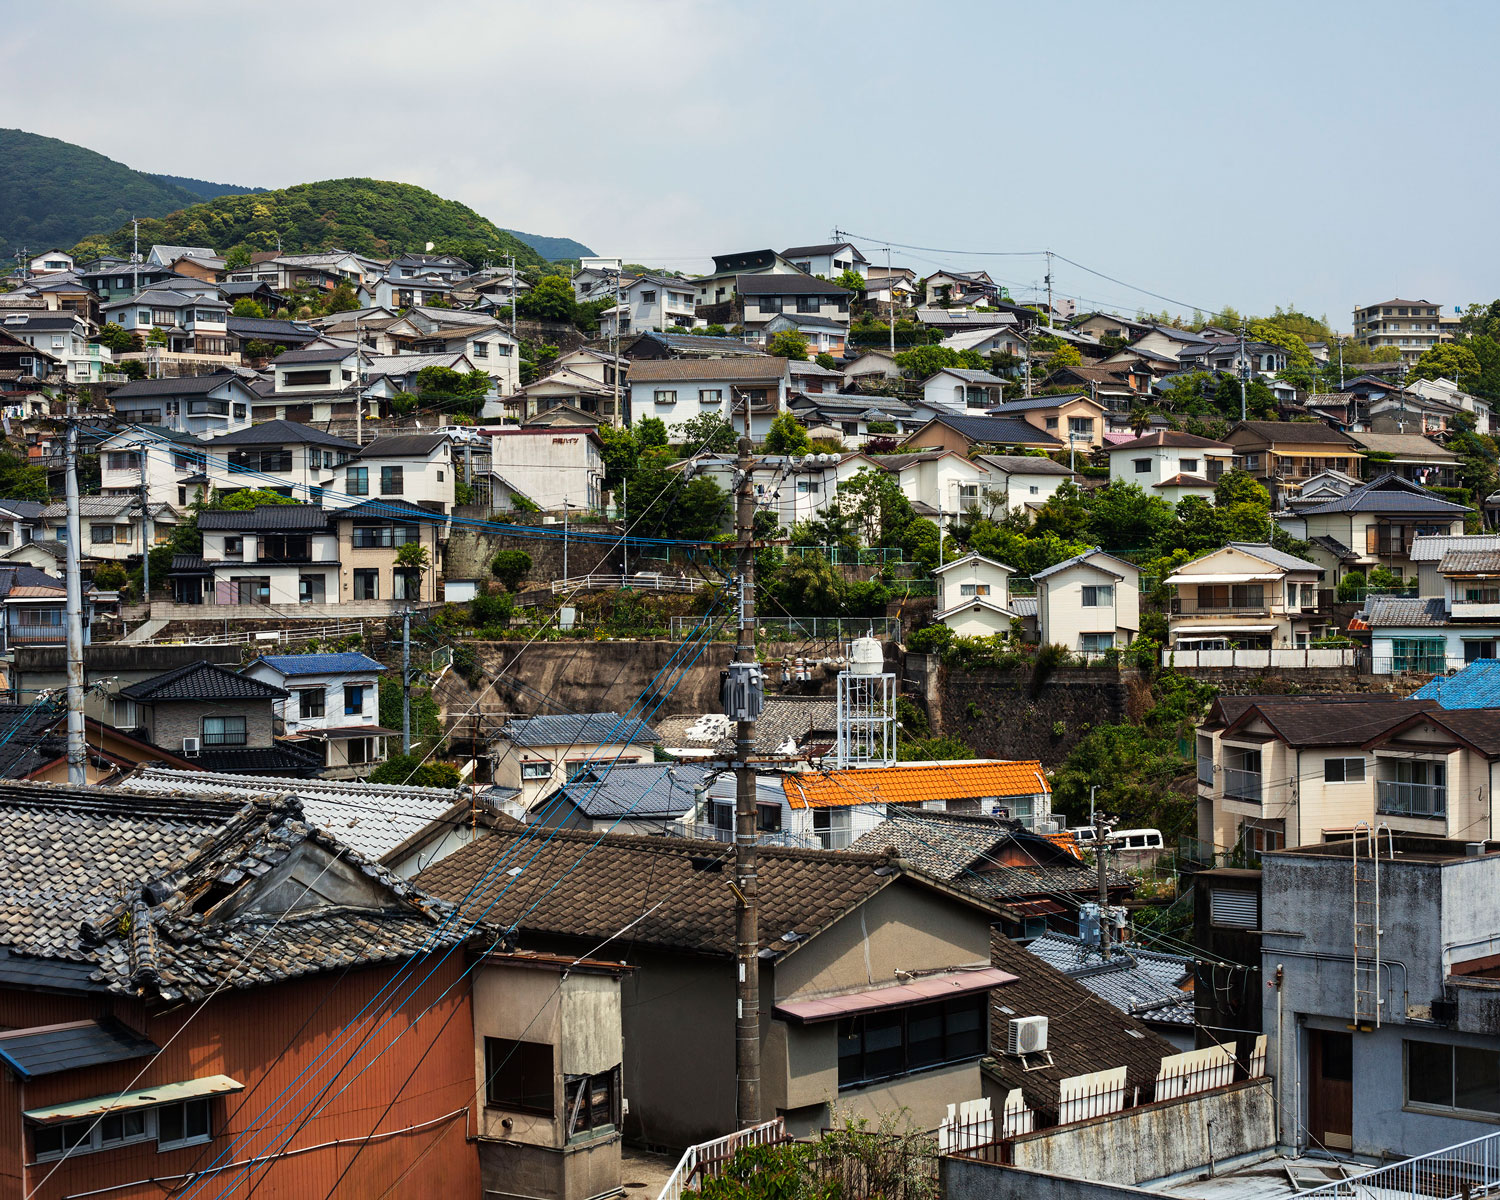   A residential area right next to downtown (Sasebo, Japan 2014)        